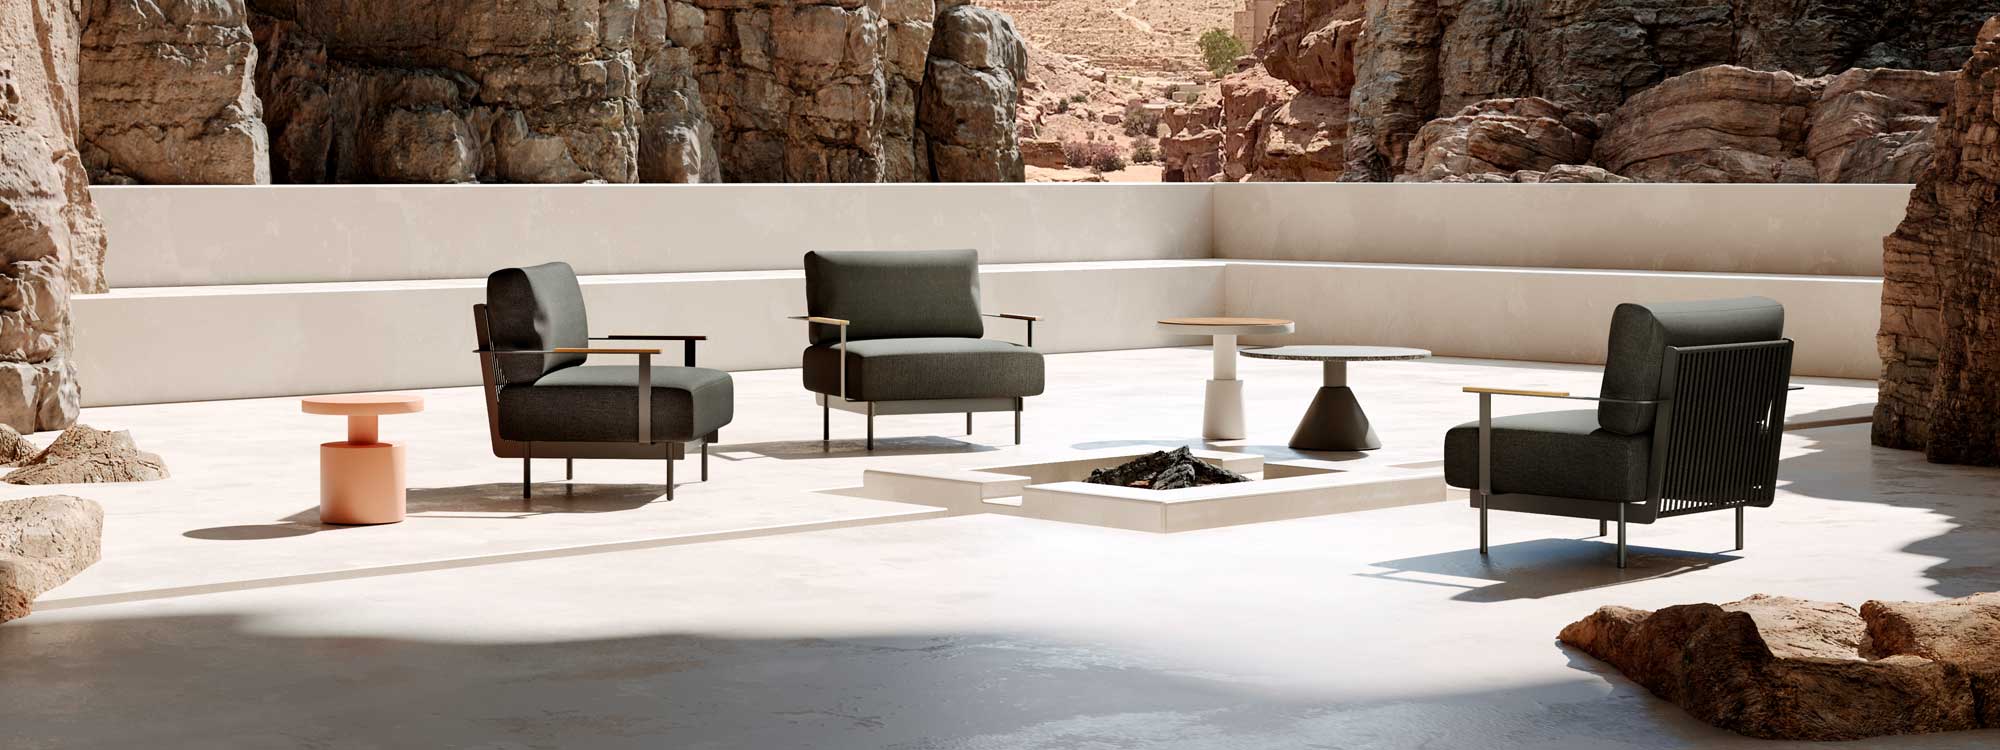 Image of Oiside Penda modern garden low chairs with Drum tables, shown on whitewashed terrace with rocky canyon in the background